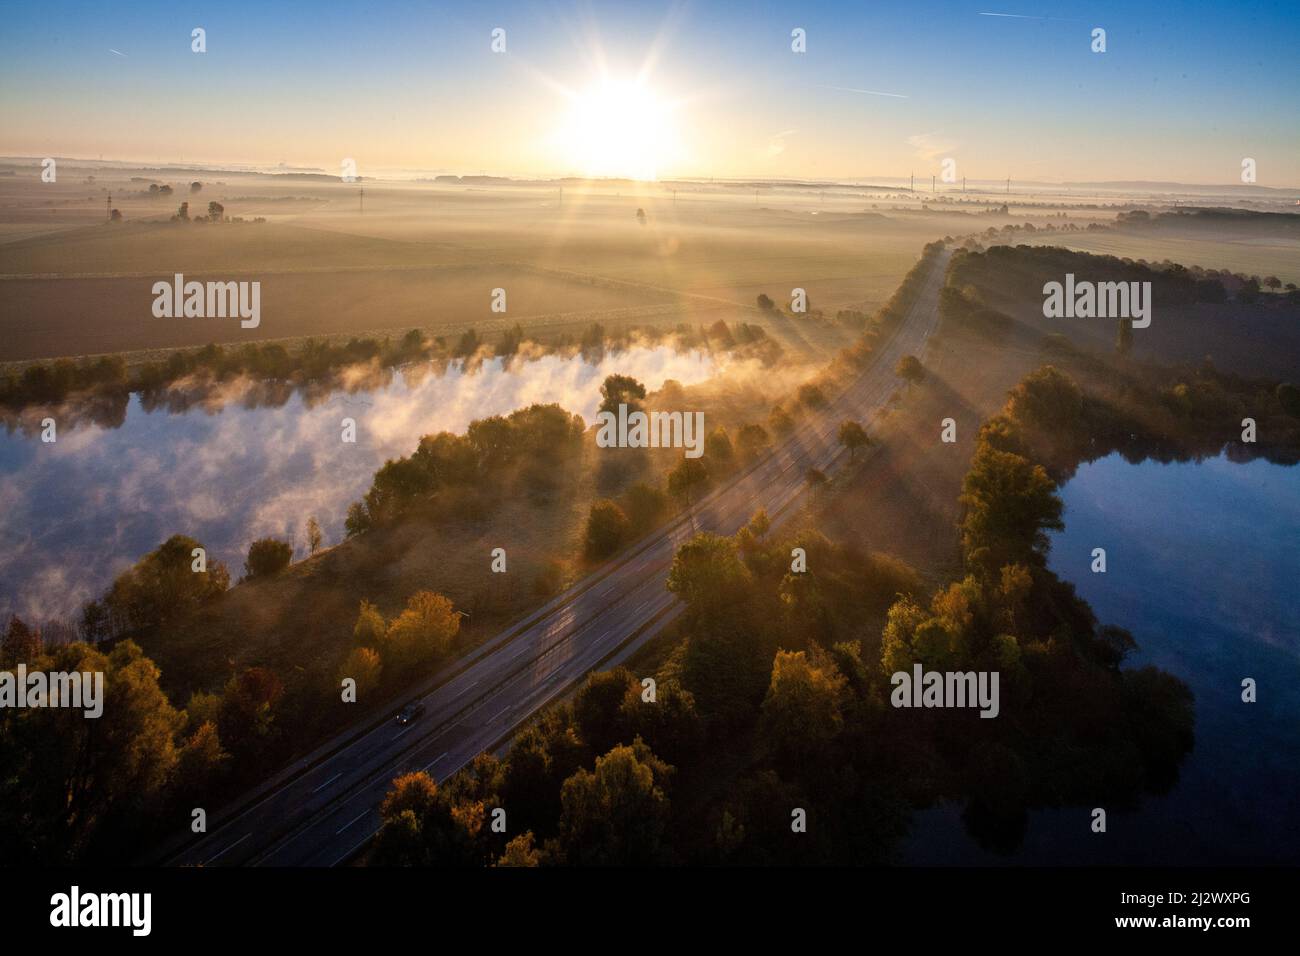 Morning landscape with lakes on the A7 near Hildesheim, back light, aerial view, sun on the horizon, German motorway, Stock Photo